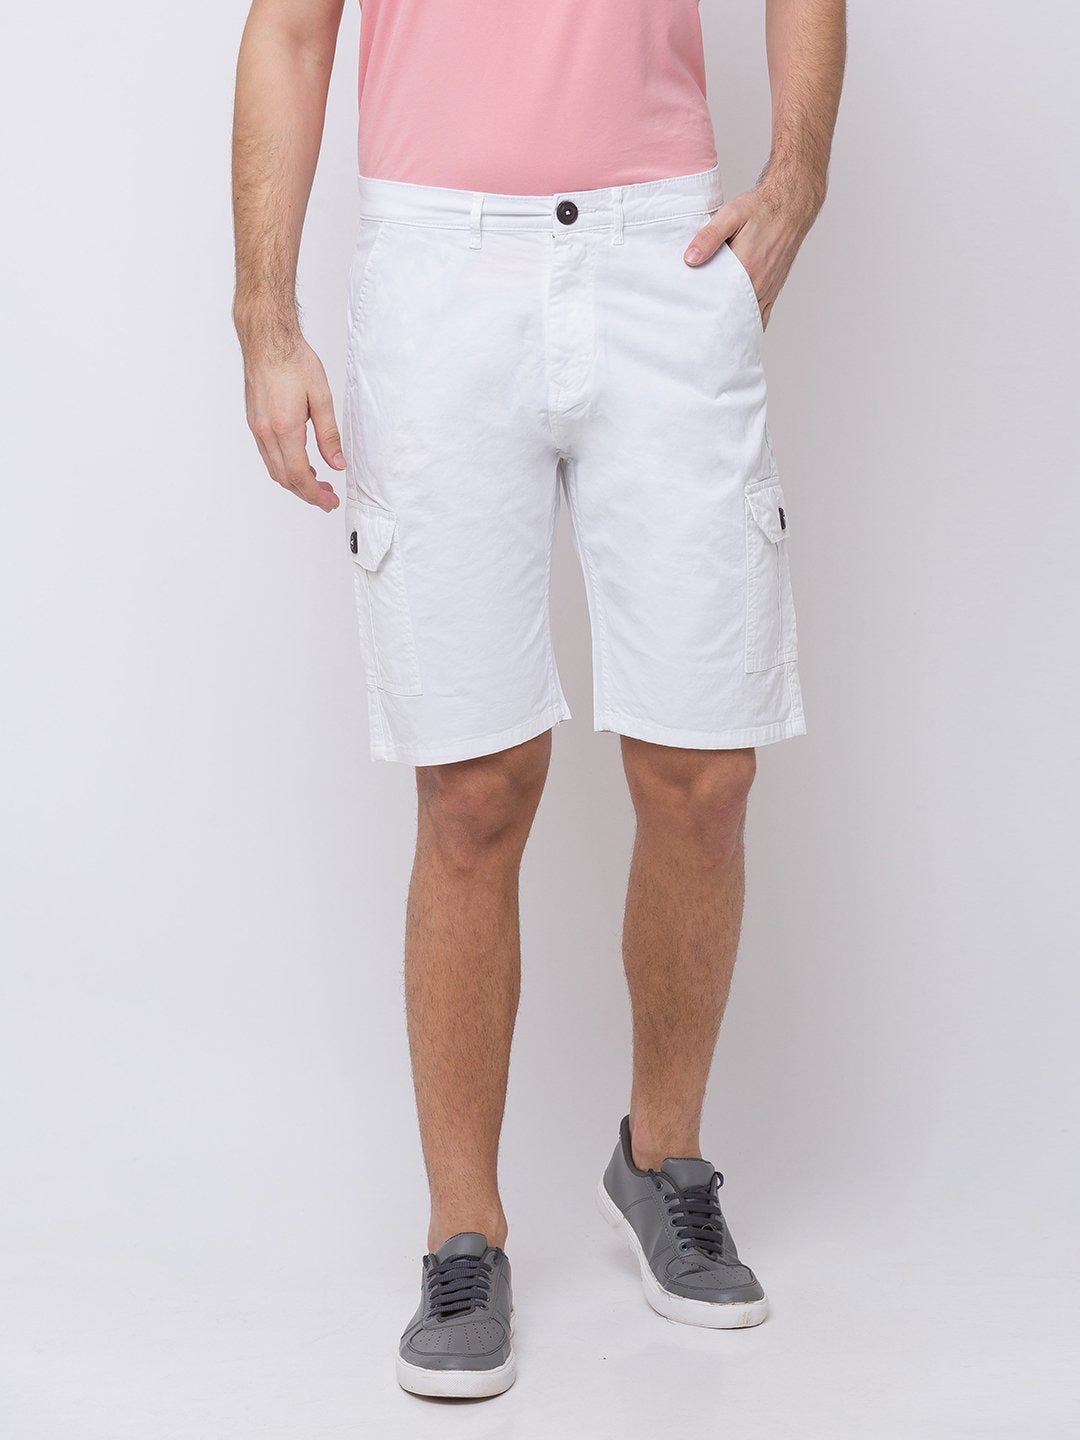 Status Quo |White Solid Woven Shorts - M, L, XL, XXL